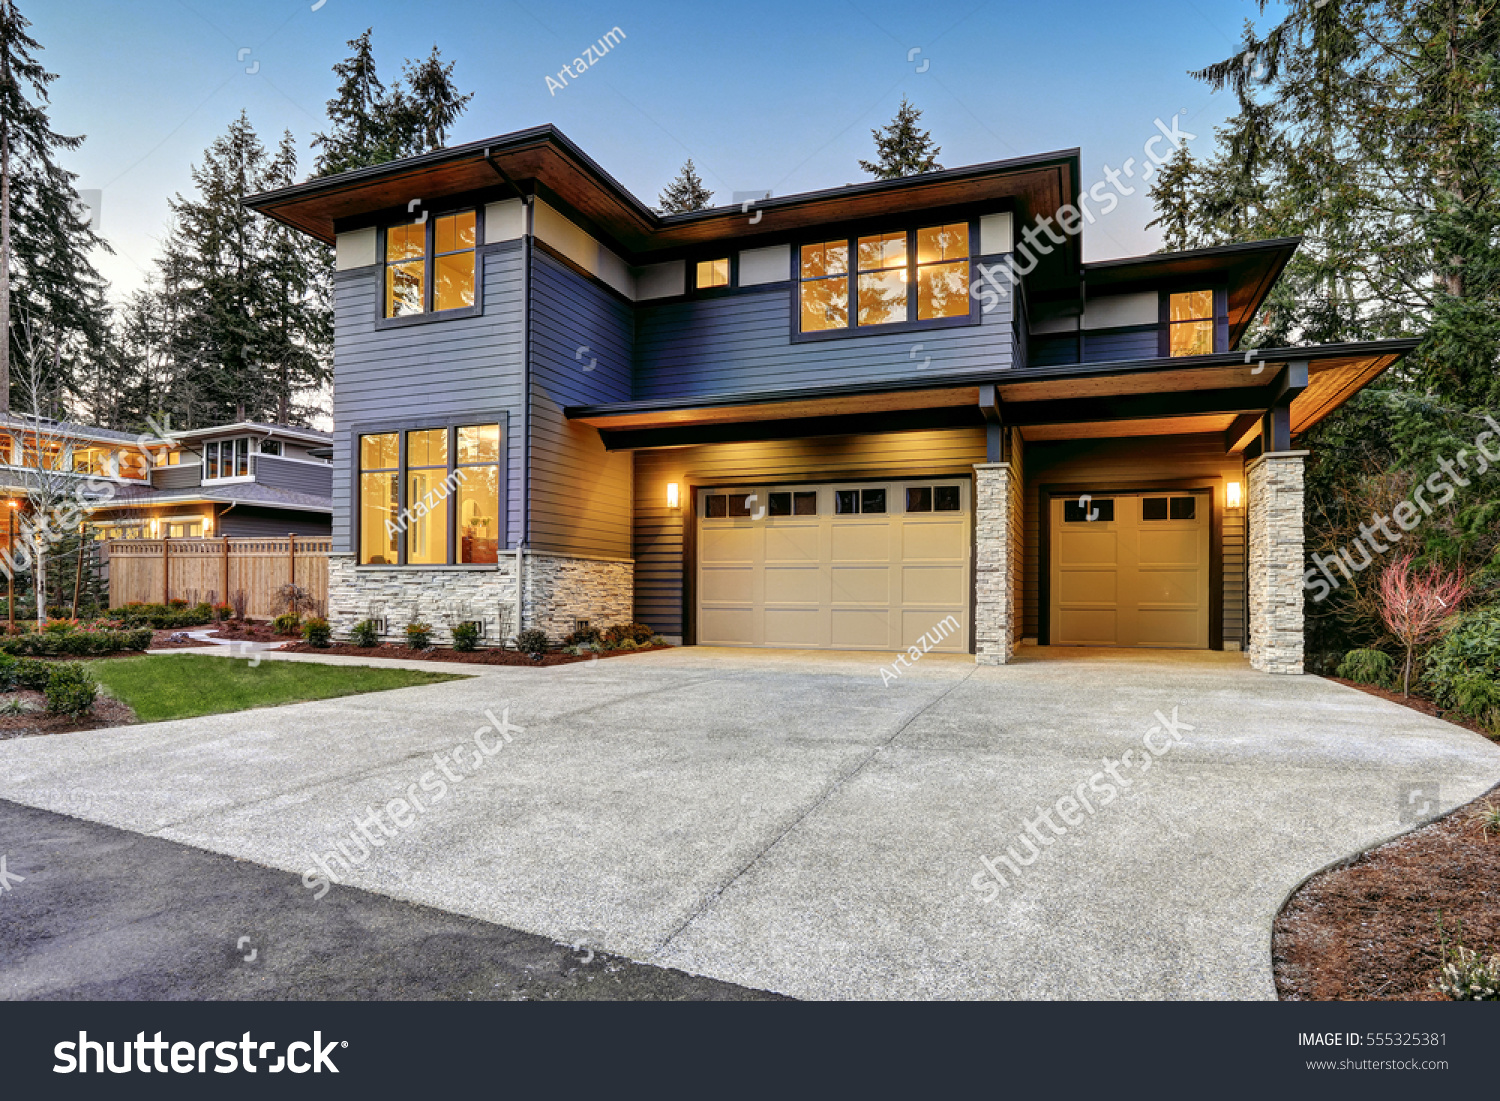 Luxurious new construction home in Bellevue, WA. Modern style home boasts two car garage framed by blue siding and natural stone wall trim. Northwest, USA #555325381